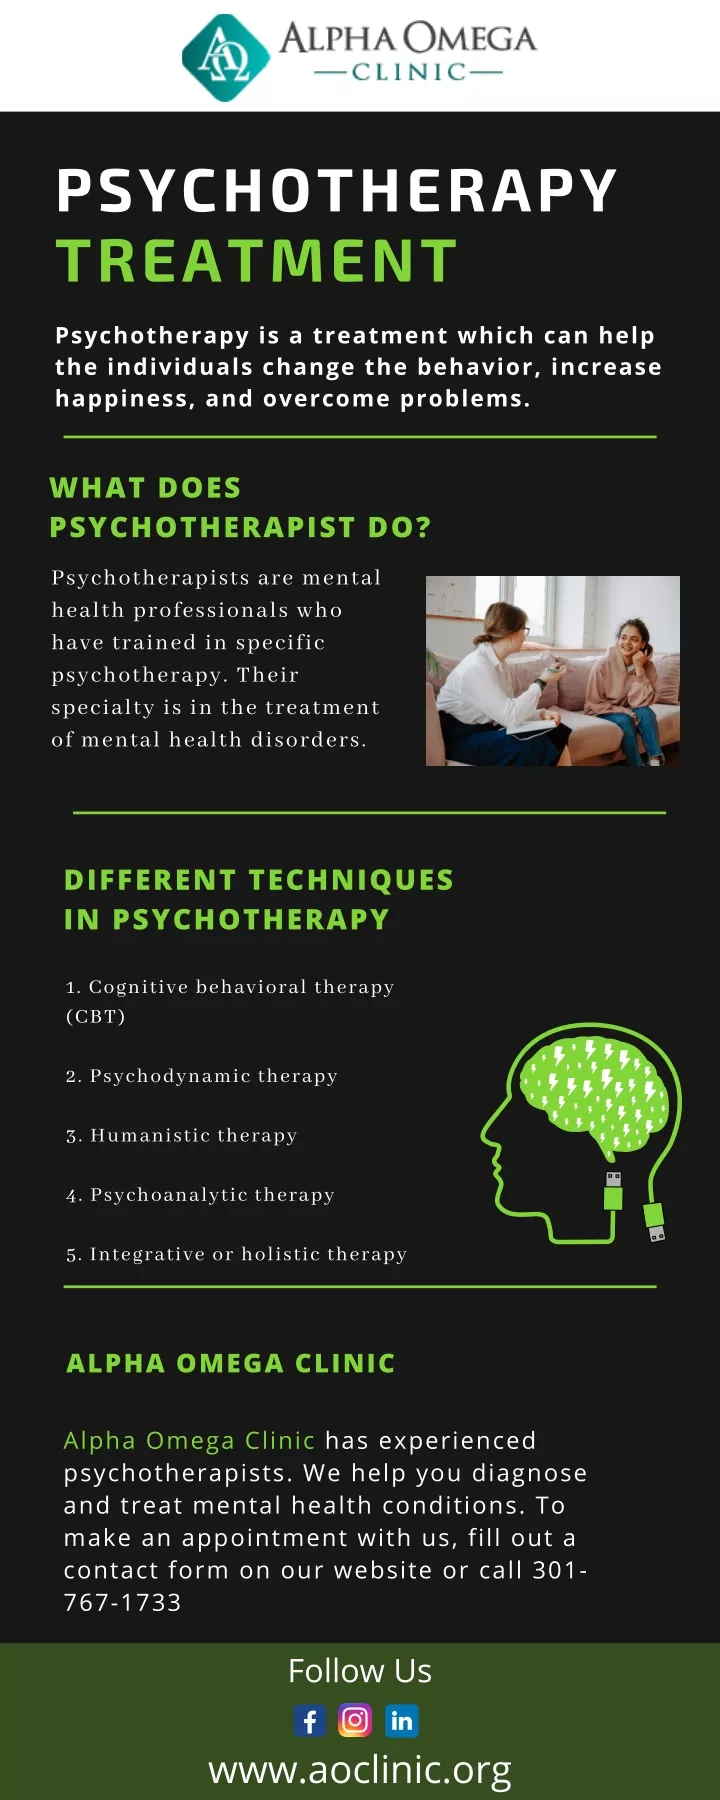 psychotherapy treatment